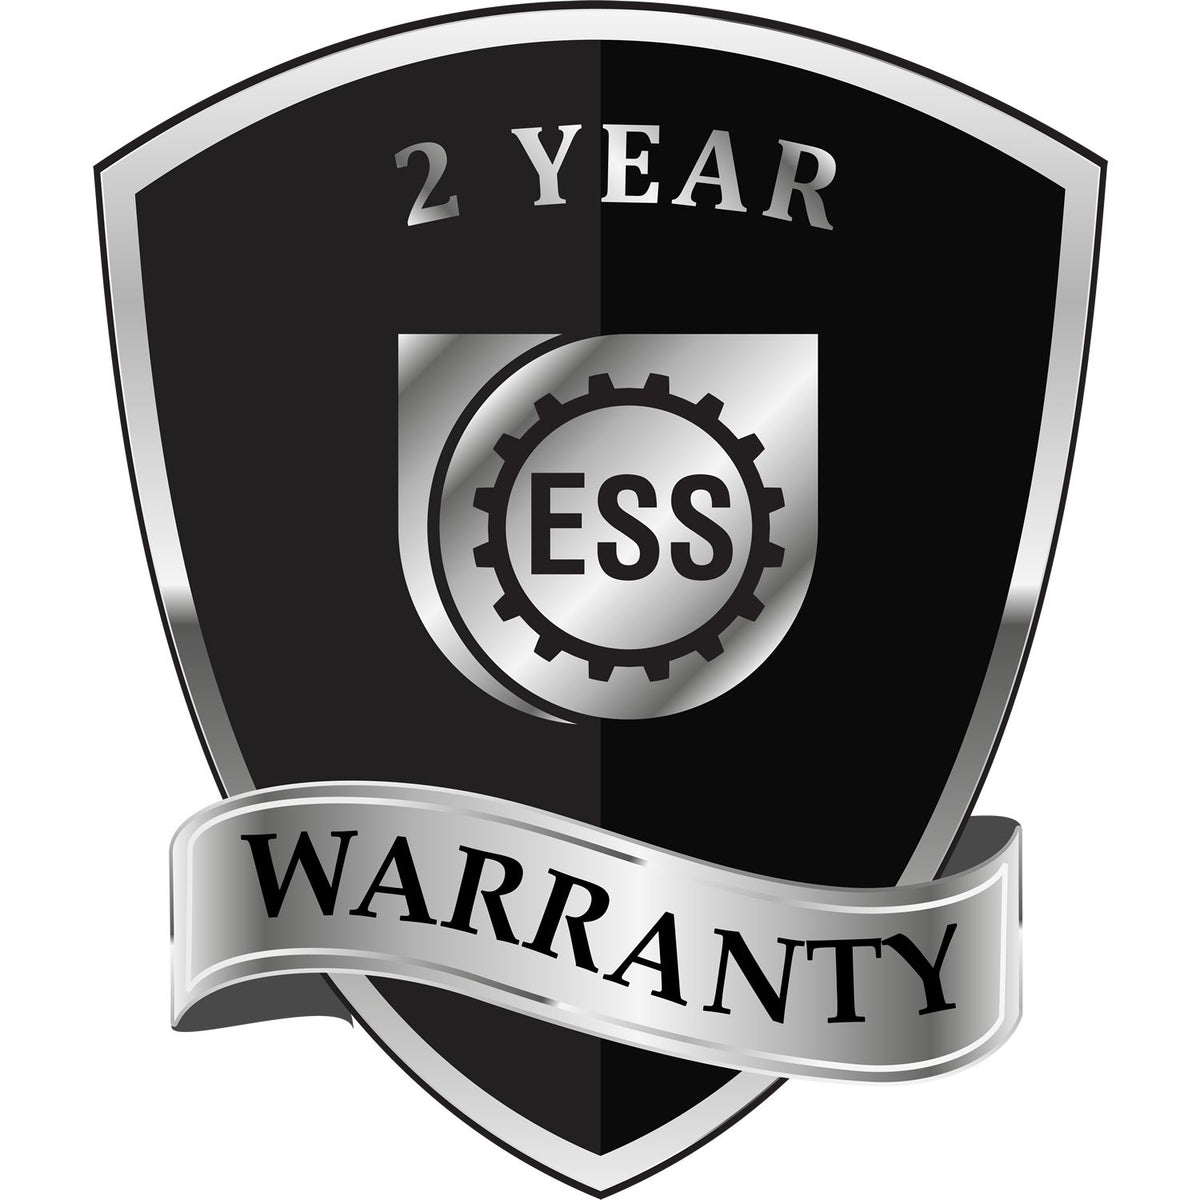 A black and silver badge or emblem showing warranty information for the Heavy Duty Cast Iron Indiana Geologist Seal Embosser